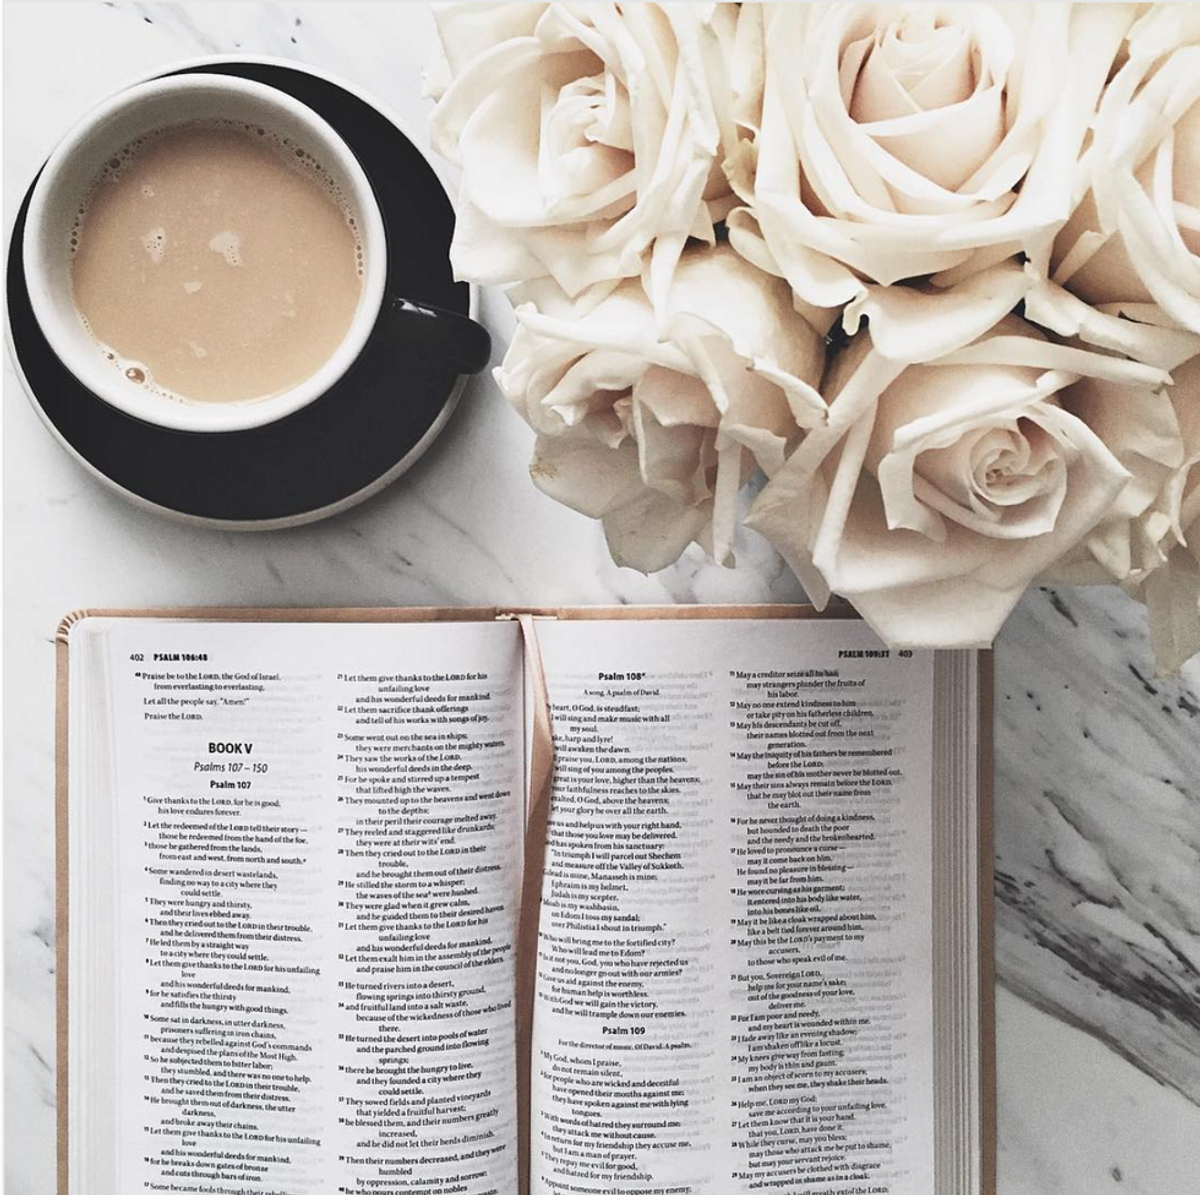 17 Bible Verses You Need Right Now